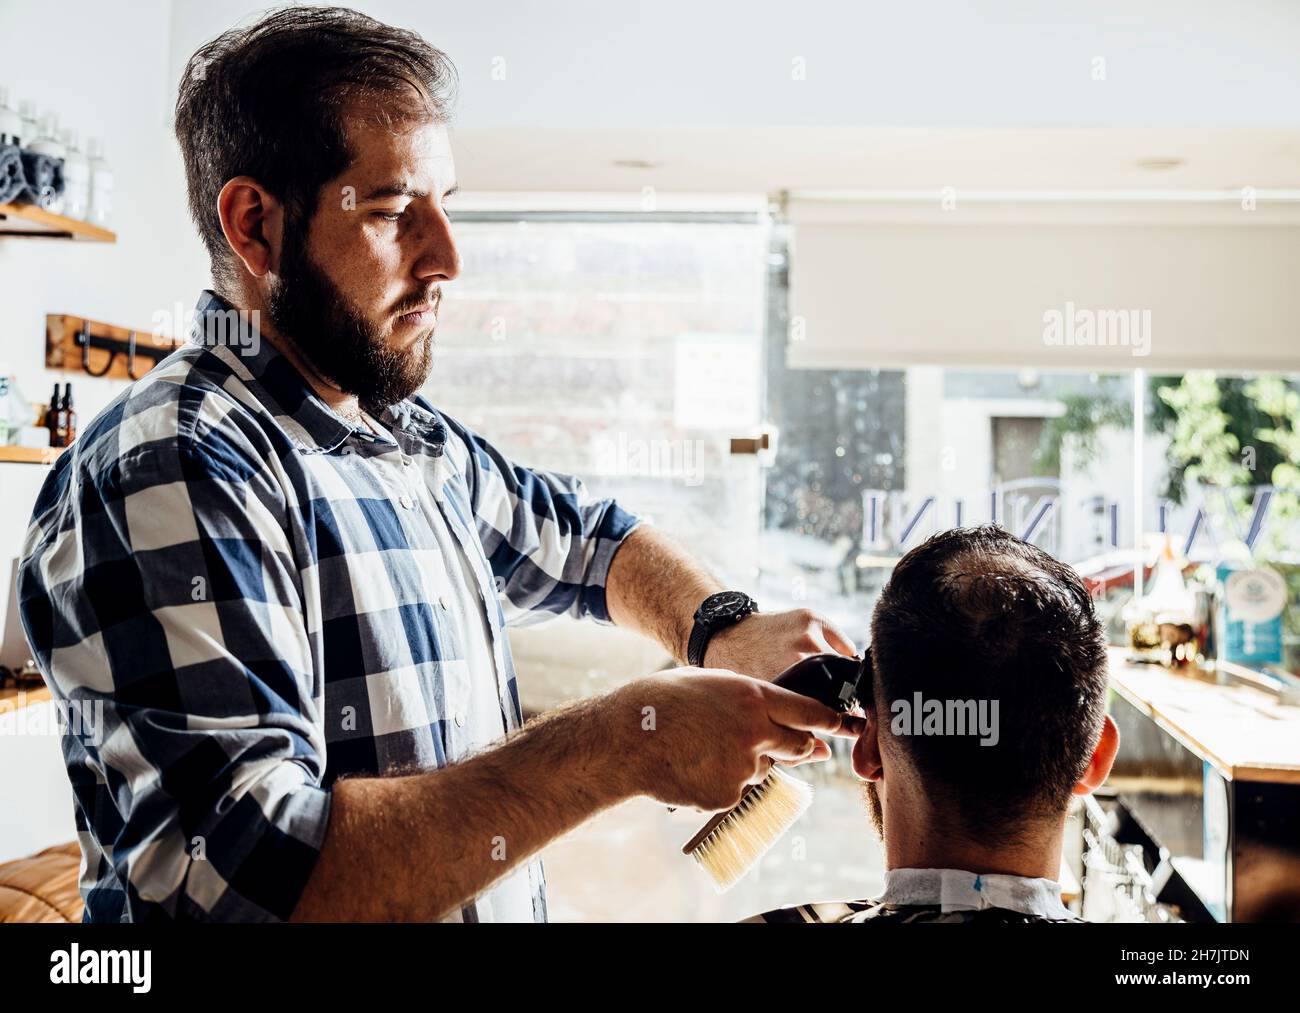 Barber cutting the client's hair. Process of trimming in the barbershop. Stock Photo